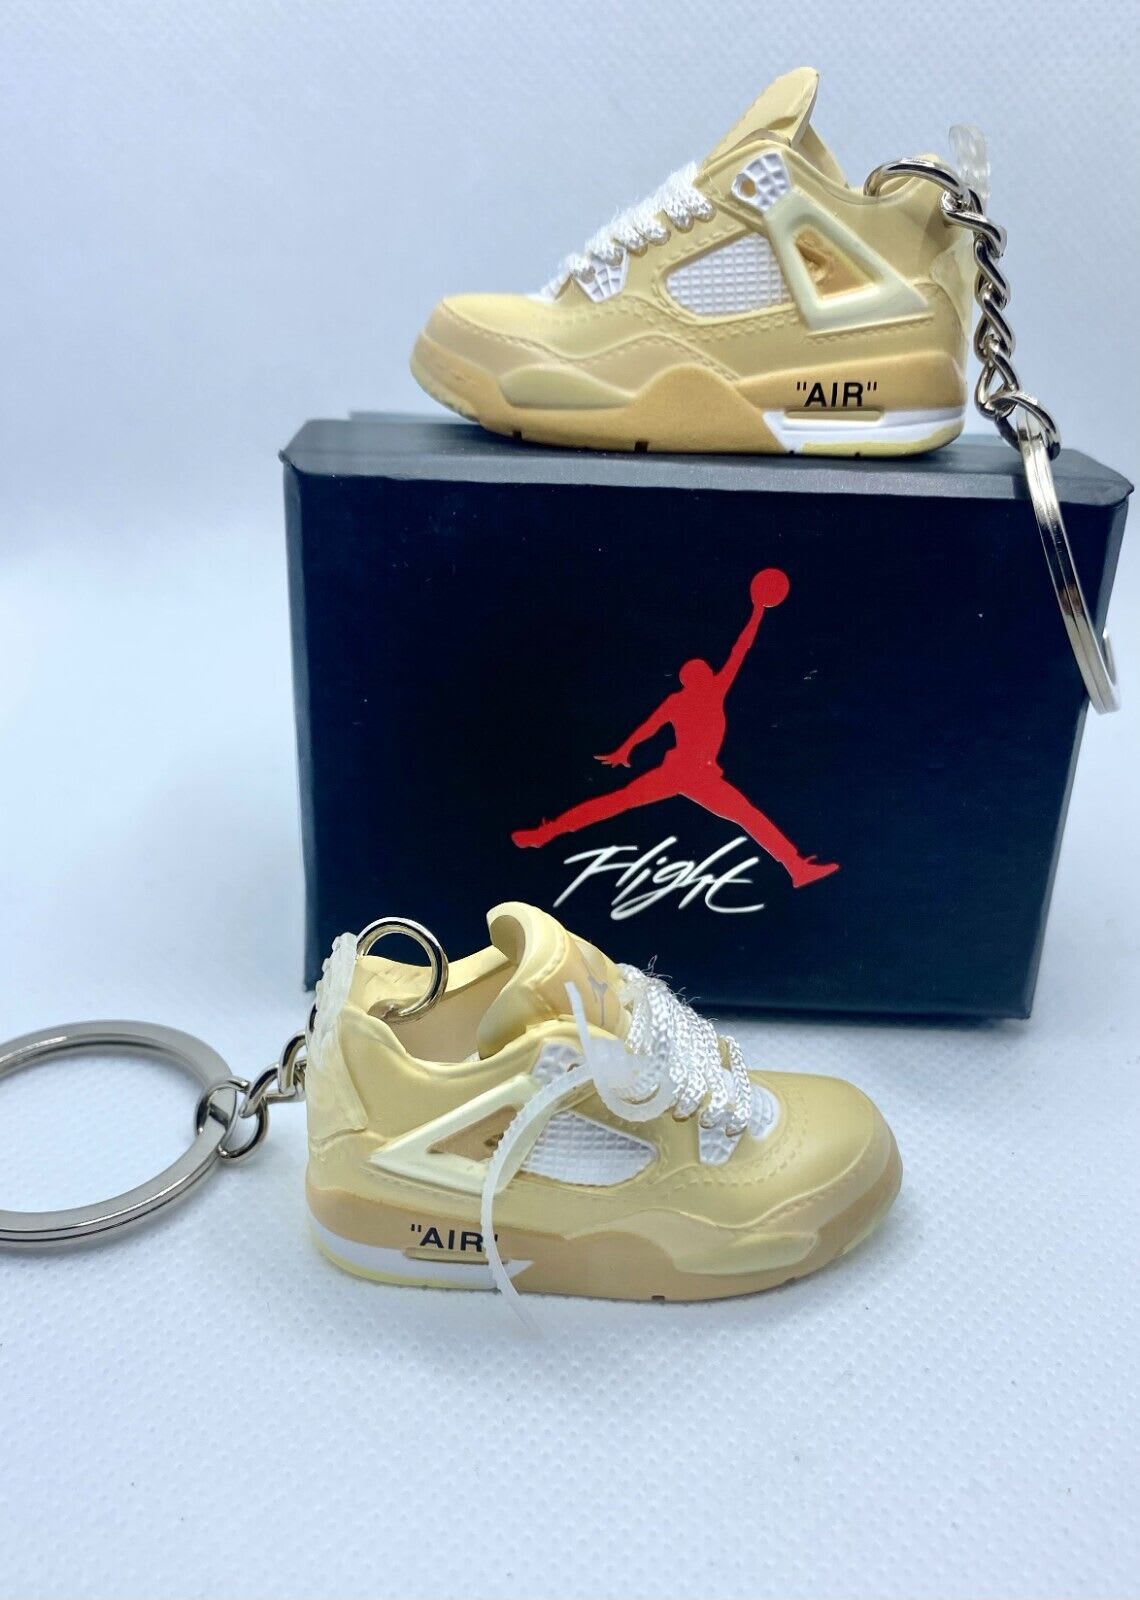 Nike/Louis Mini Shoe Keychain Single or Pair With or Without The